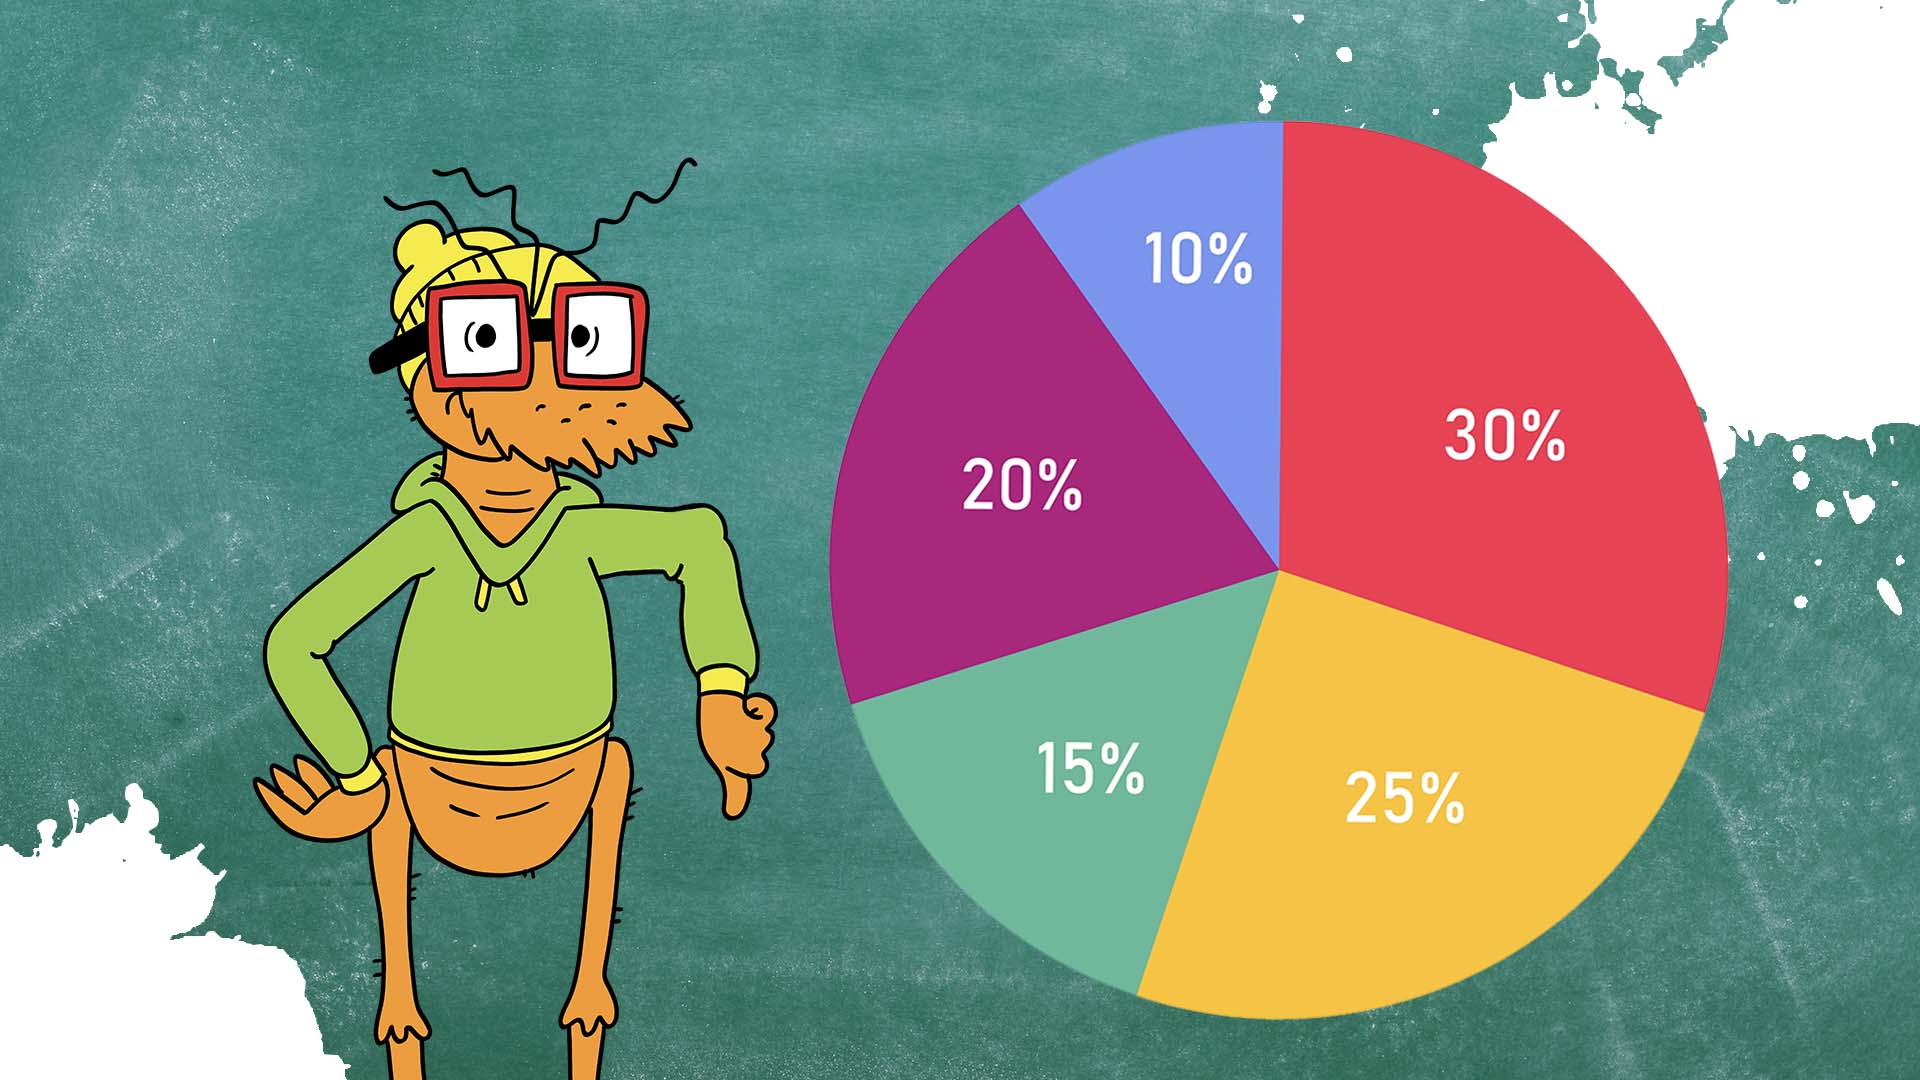 Pieface Flea and a pie chart